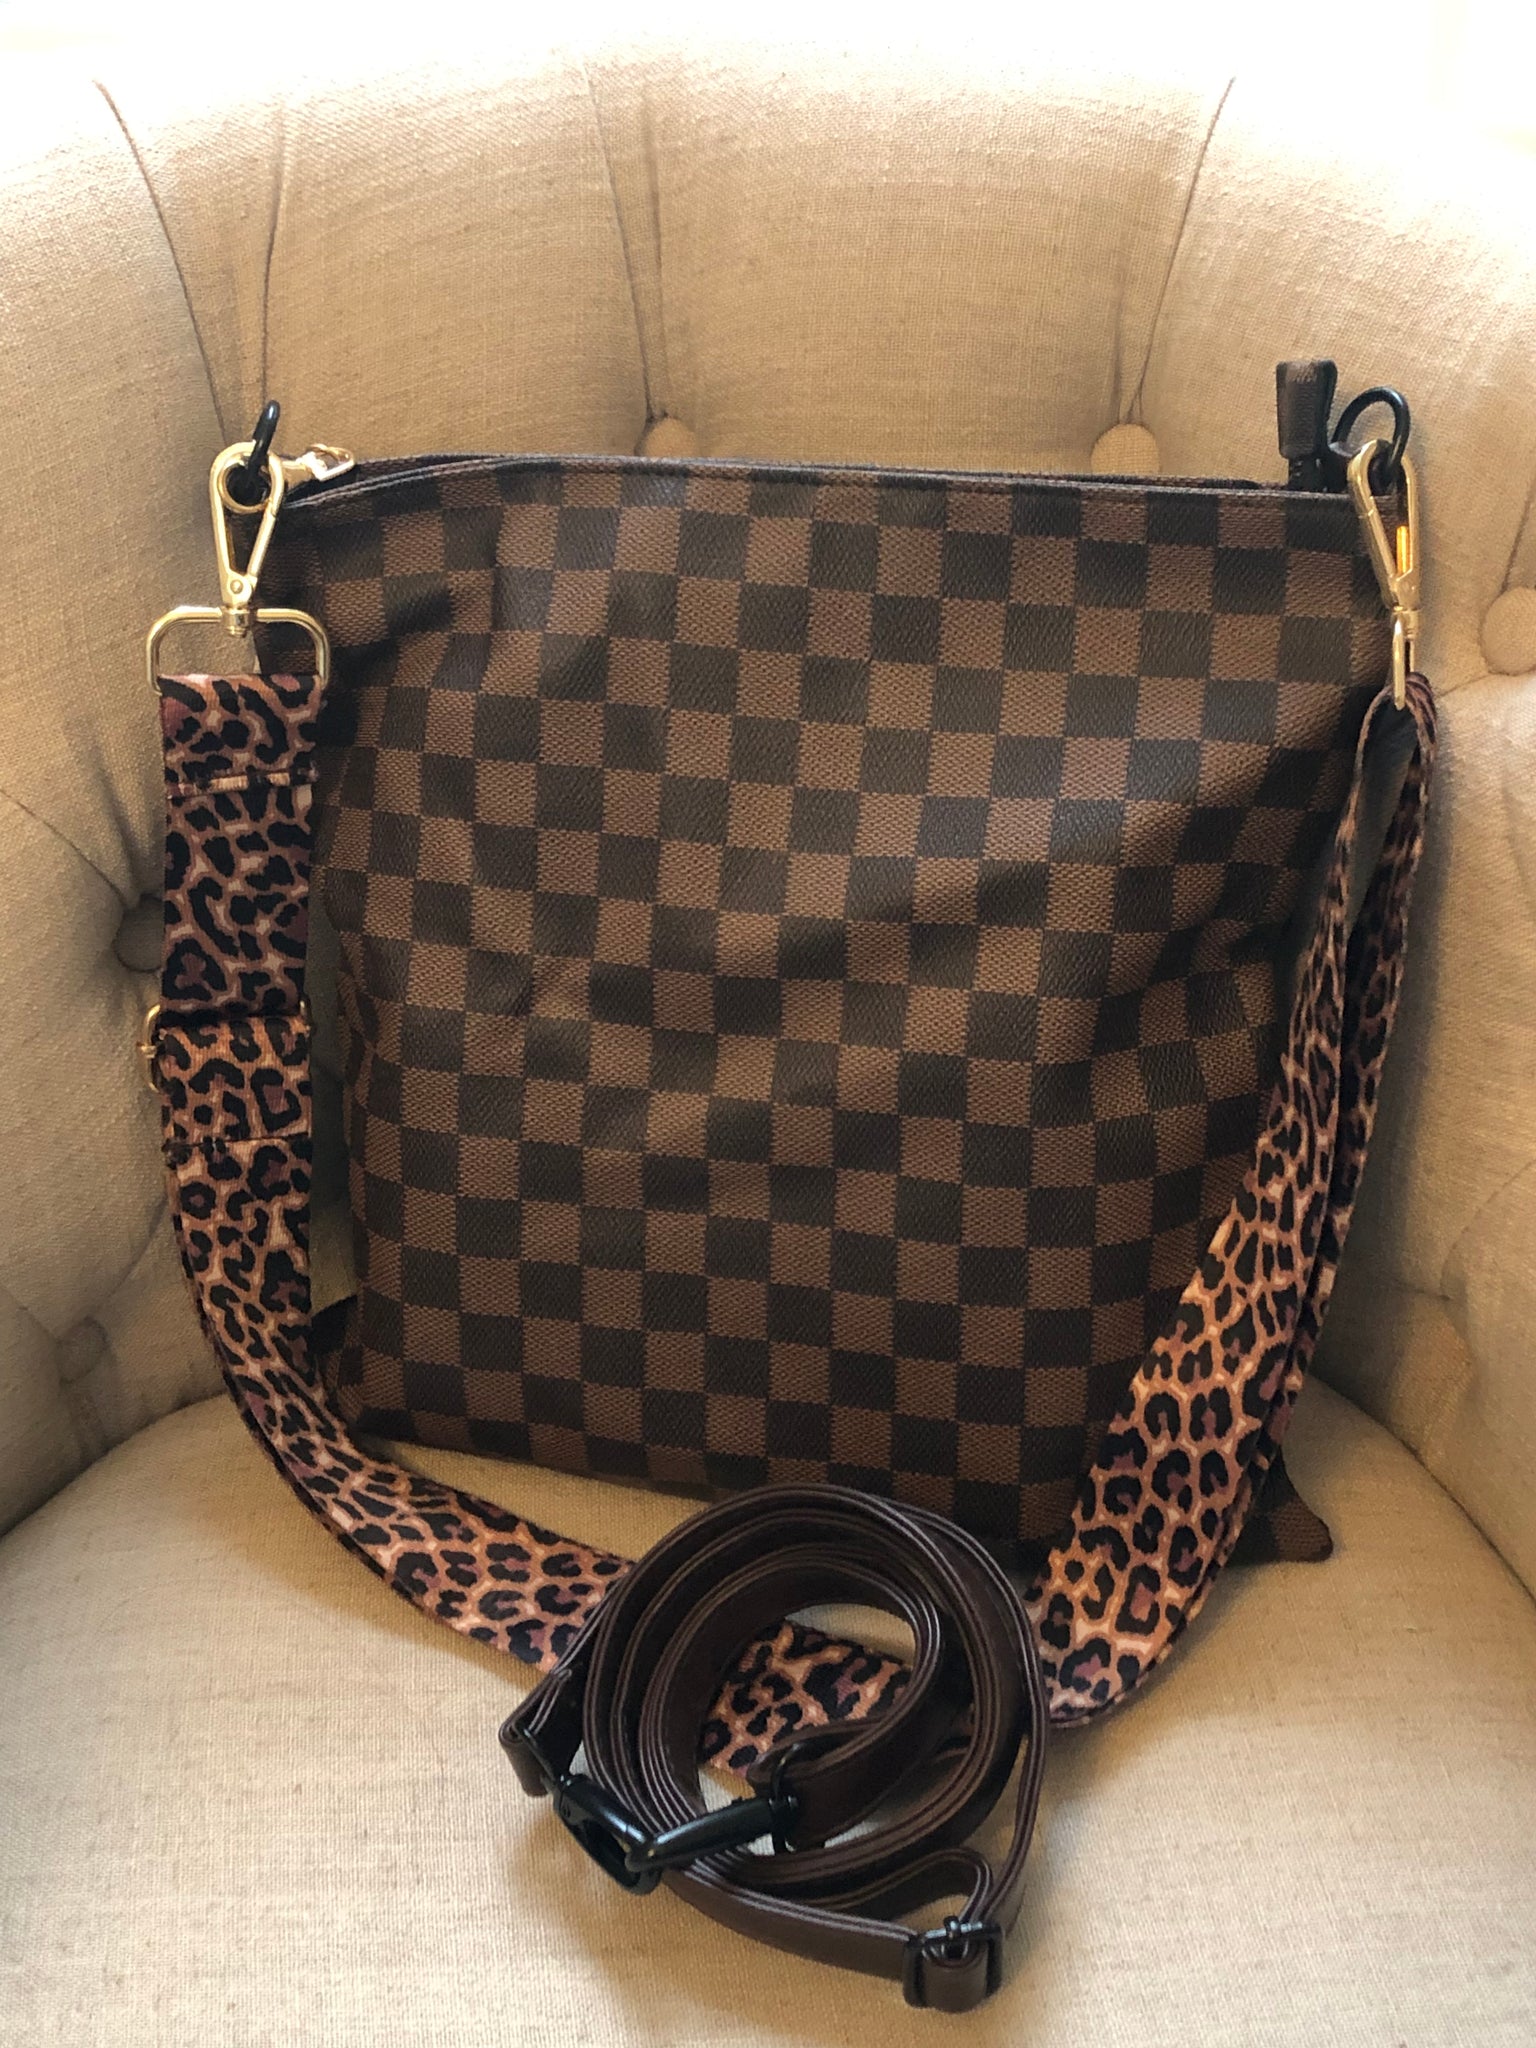 Checkered Crossbody Bag with Leopard Strap